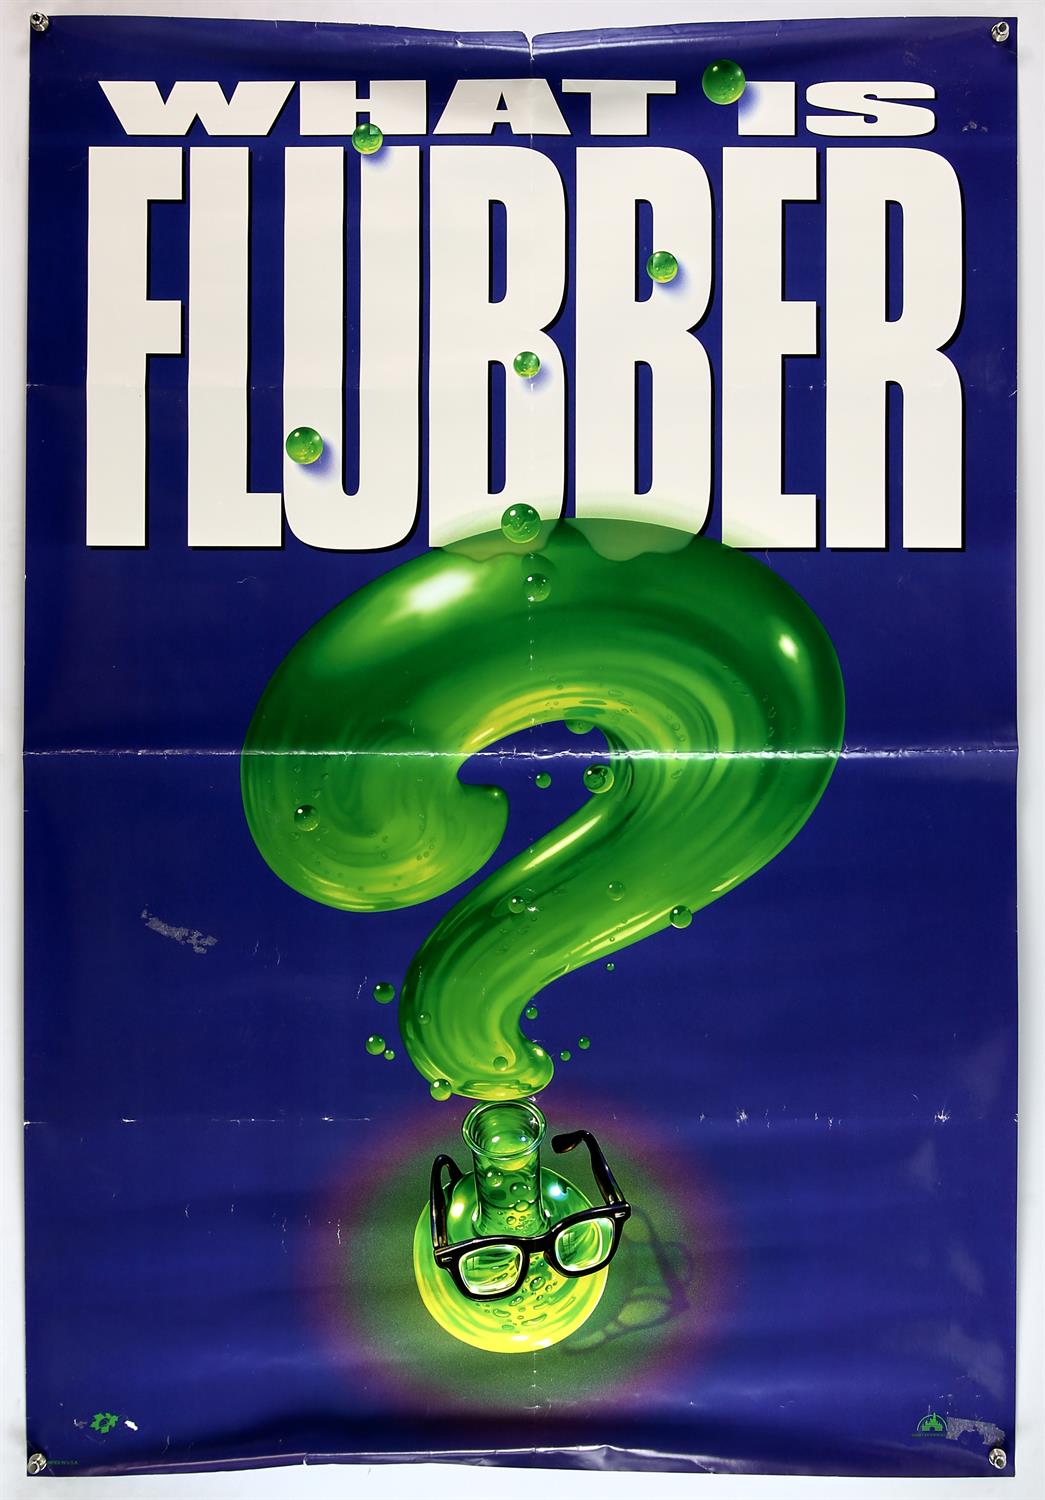 Eleven British Quad and One Sheet film posters, includes, Eragon; What is Flubber; and The Love